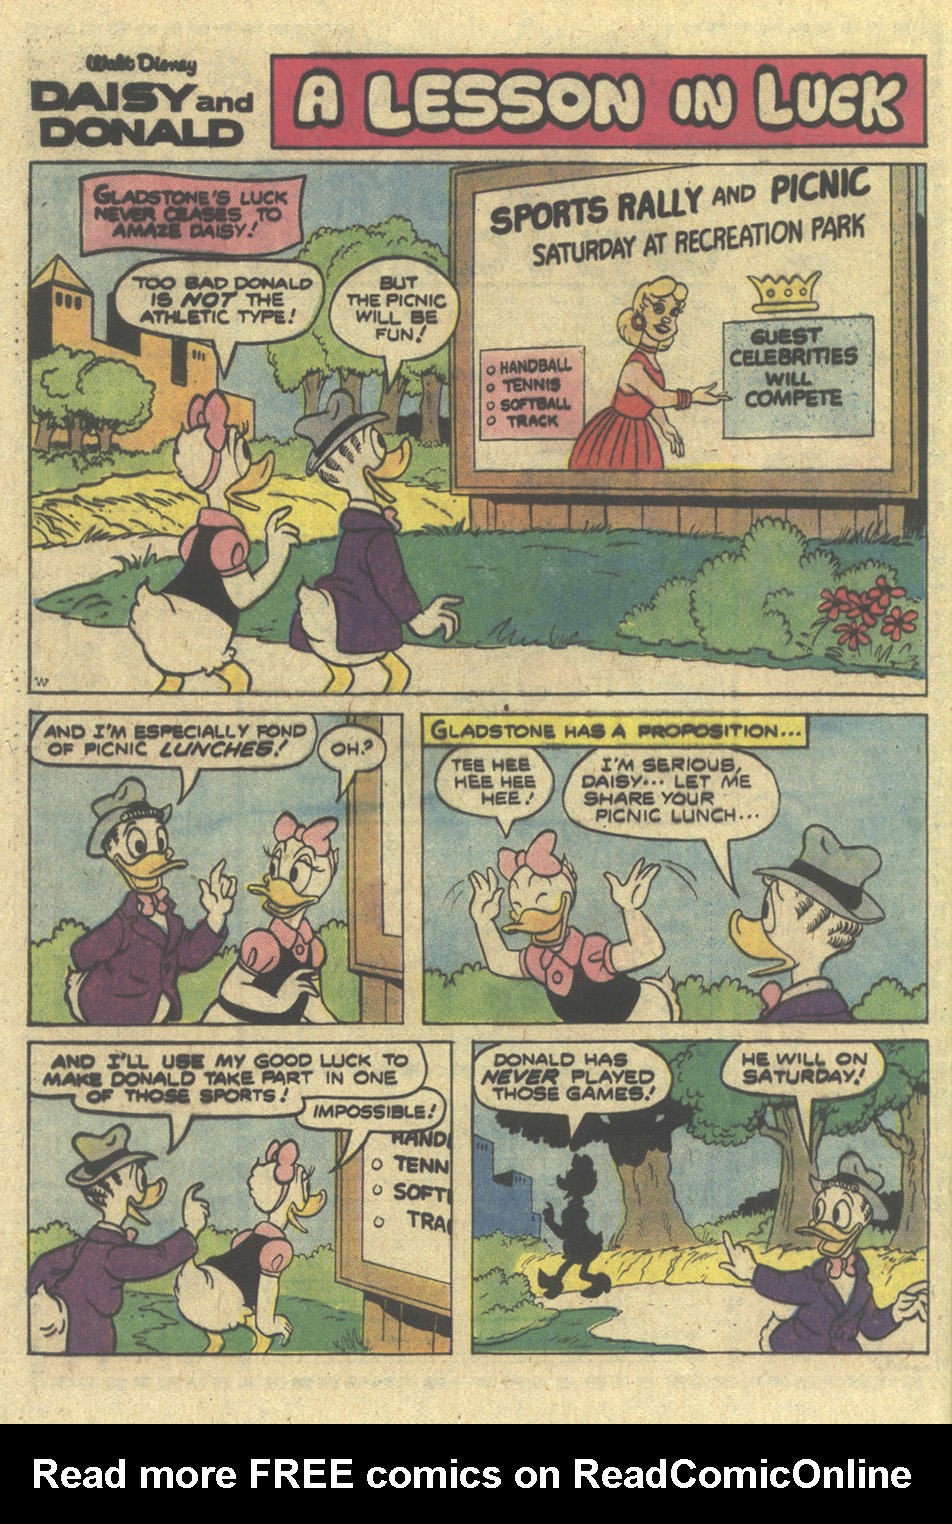 Read online Walt Disney Daisy and Donald comic -  Issue #33 - 20